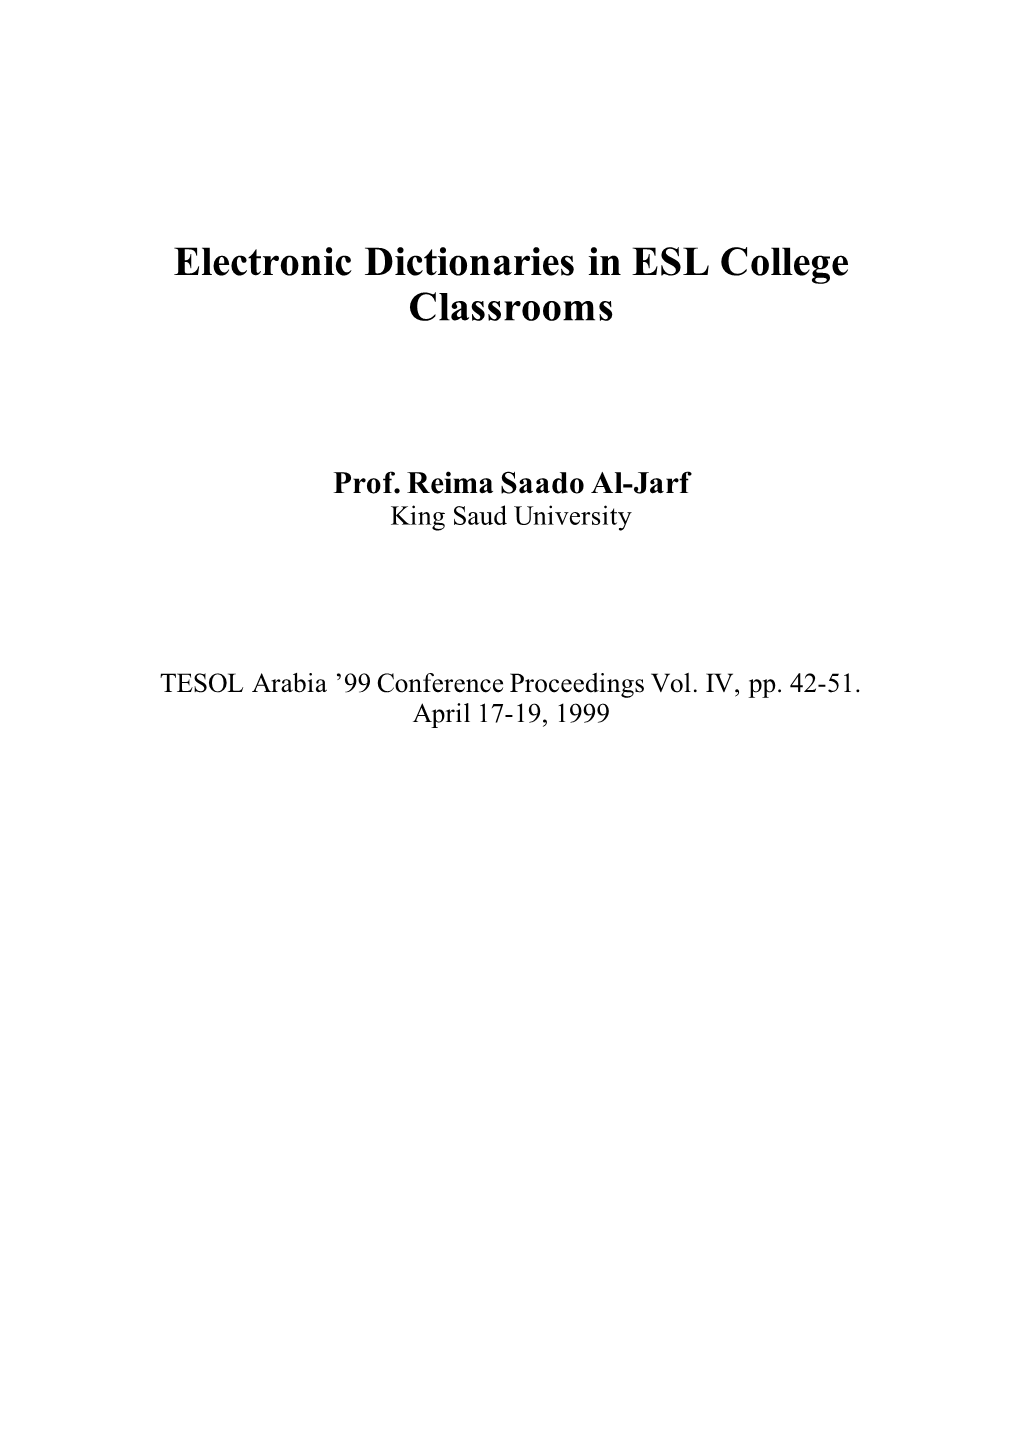 Electronic Dictionaries in ESL College Classrooms